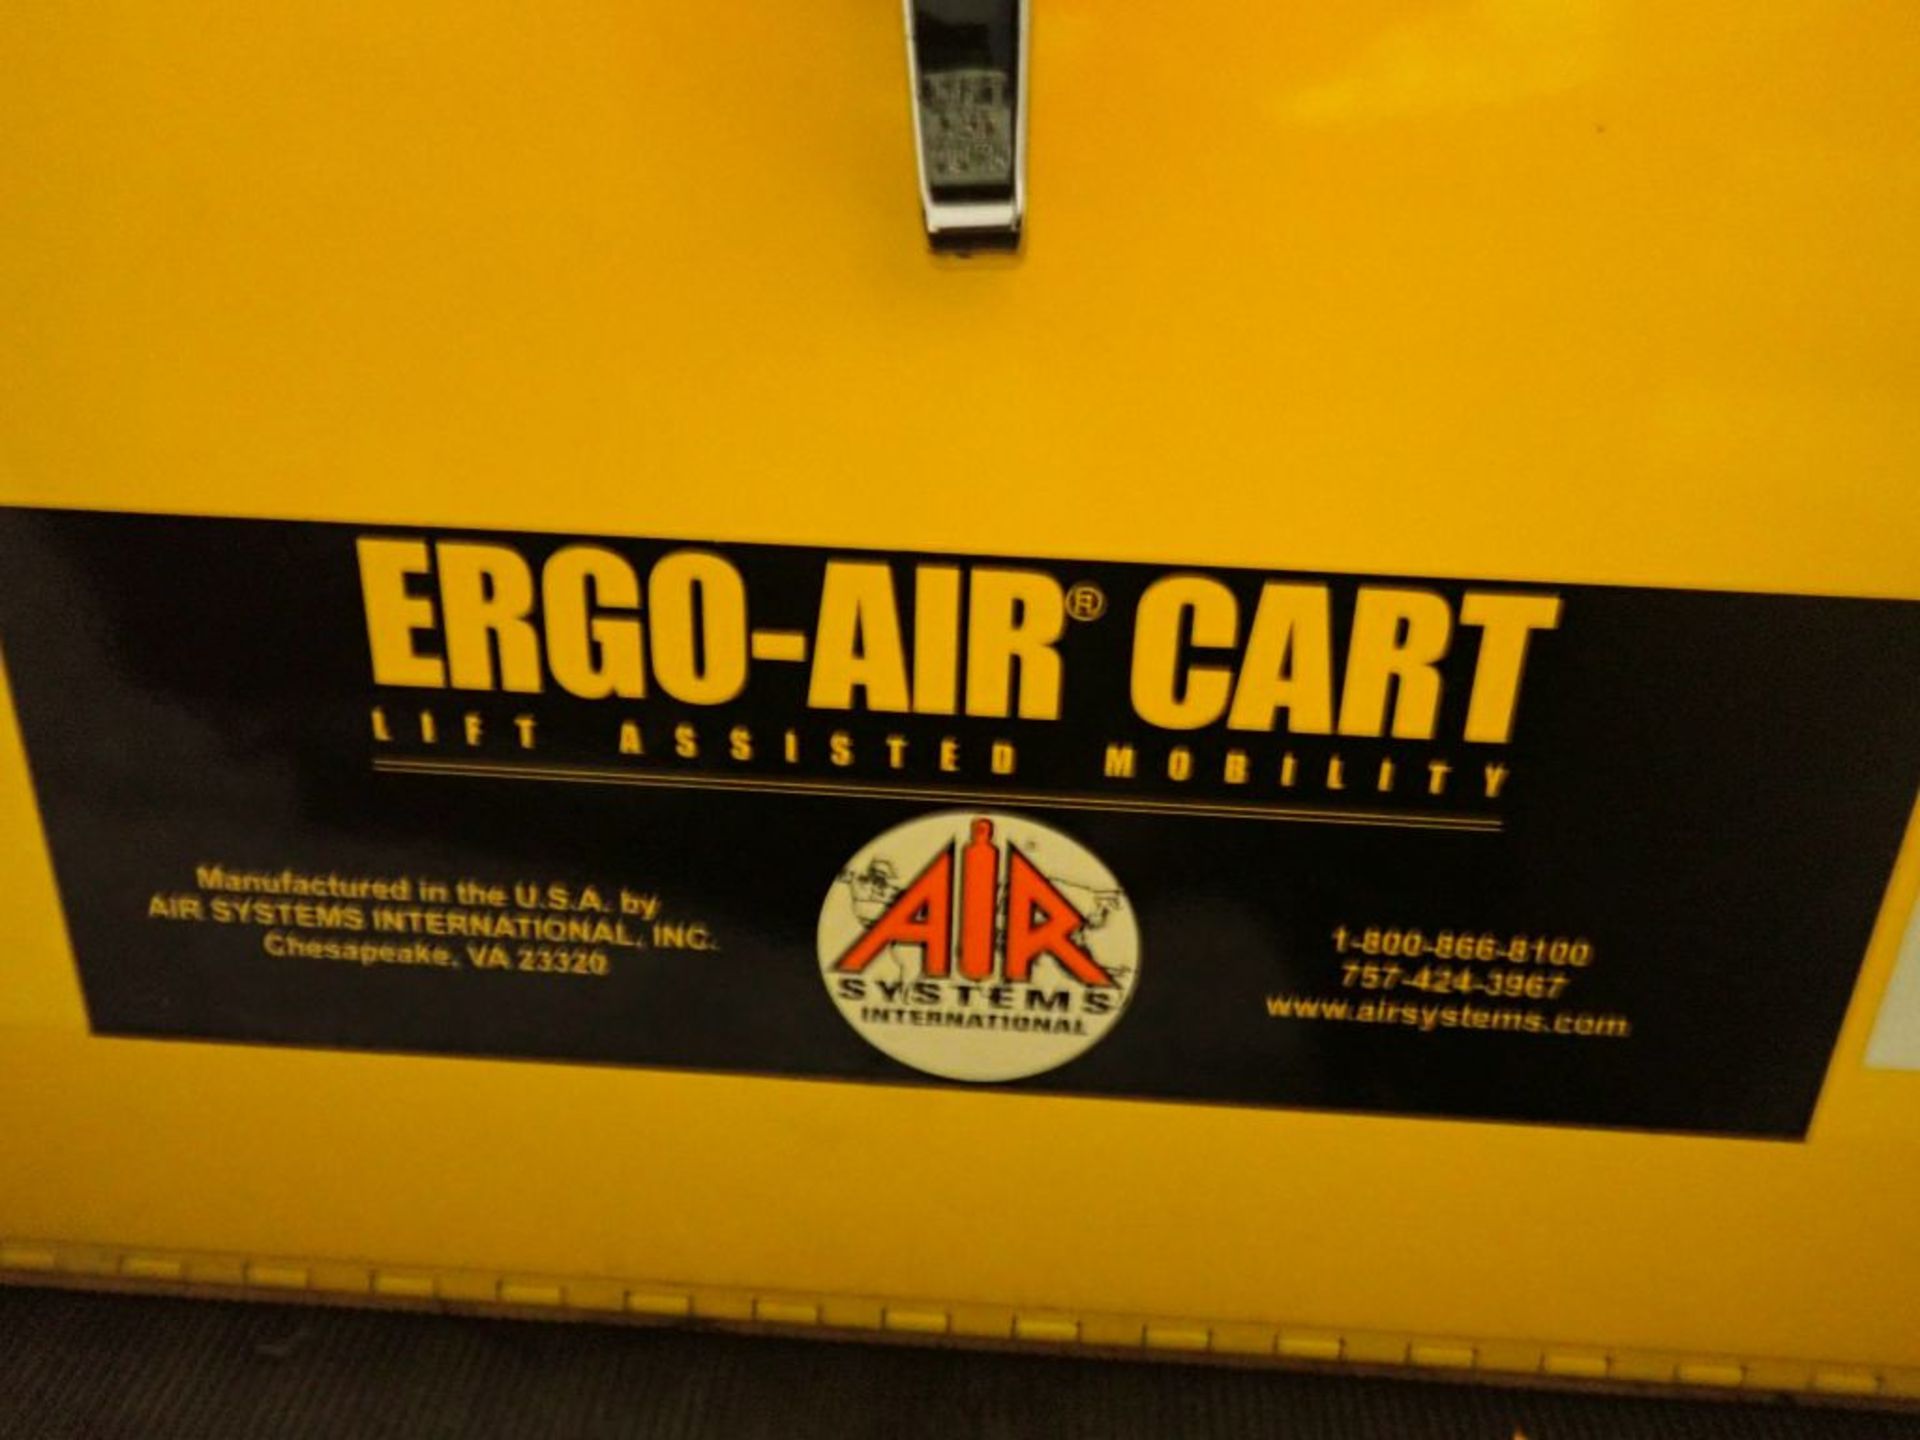 Air Systems International Ergo-Air Cart | Model No. EAC-97-THE NP; Includes: (2) Breathing Air Air- - Image 4 of 7